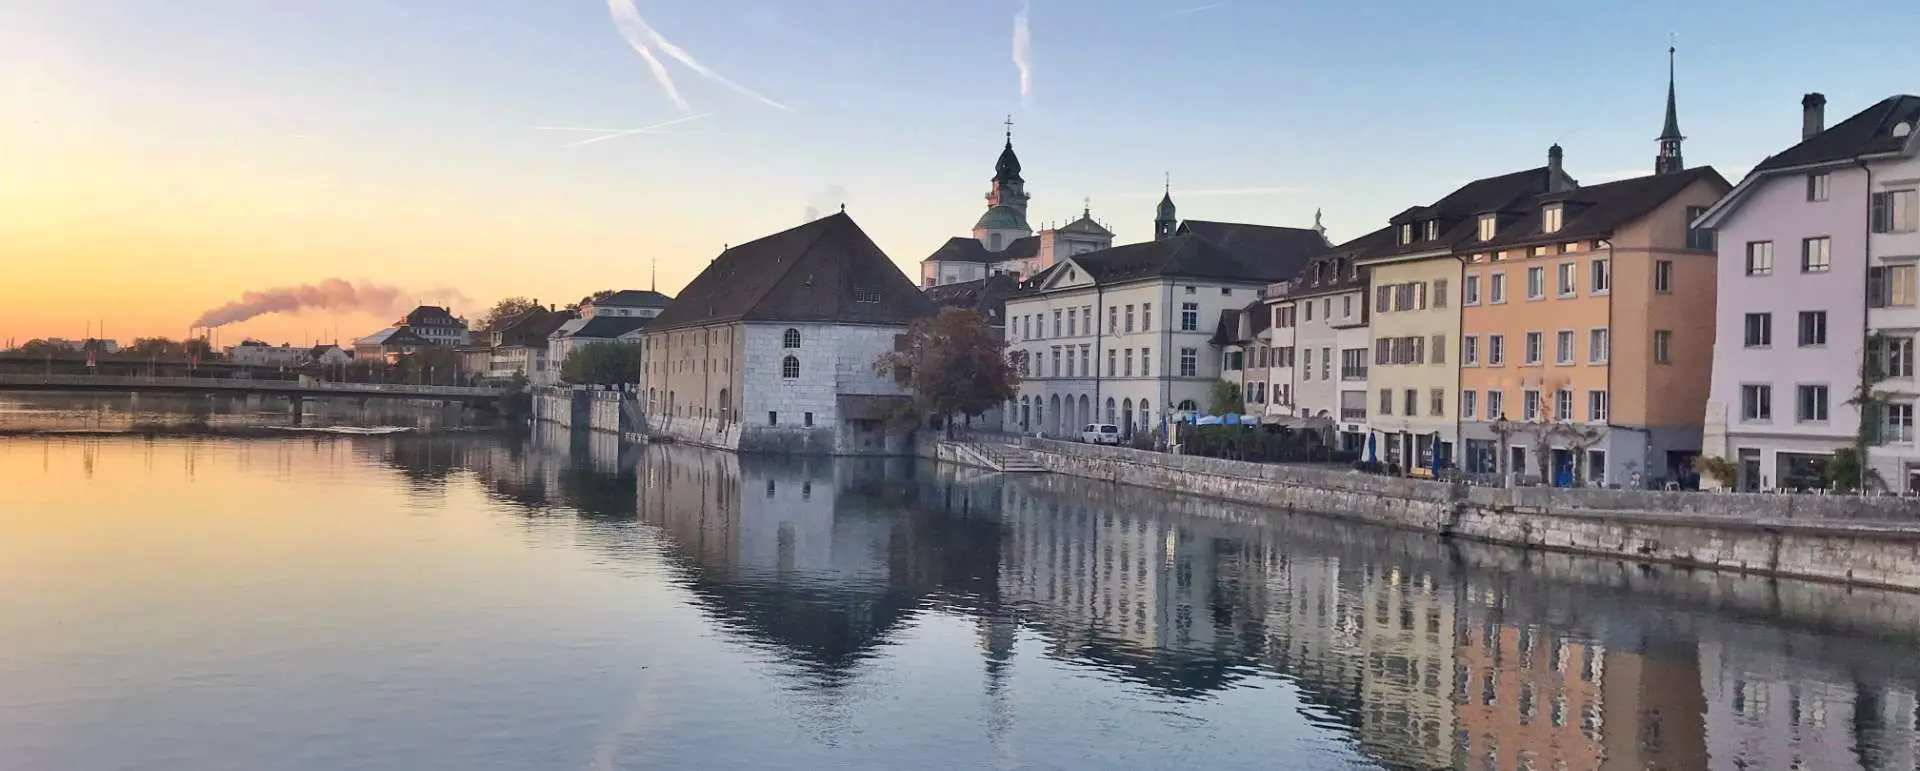 Solothurn - Top incentive travel hotels for rewarding experiences